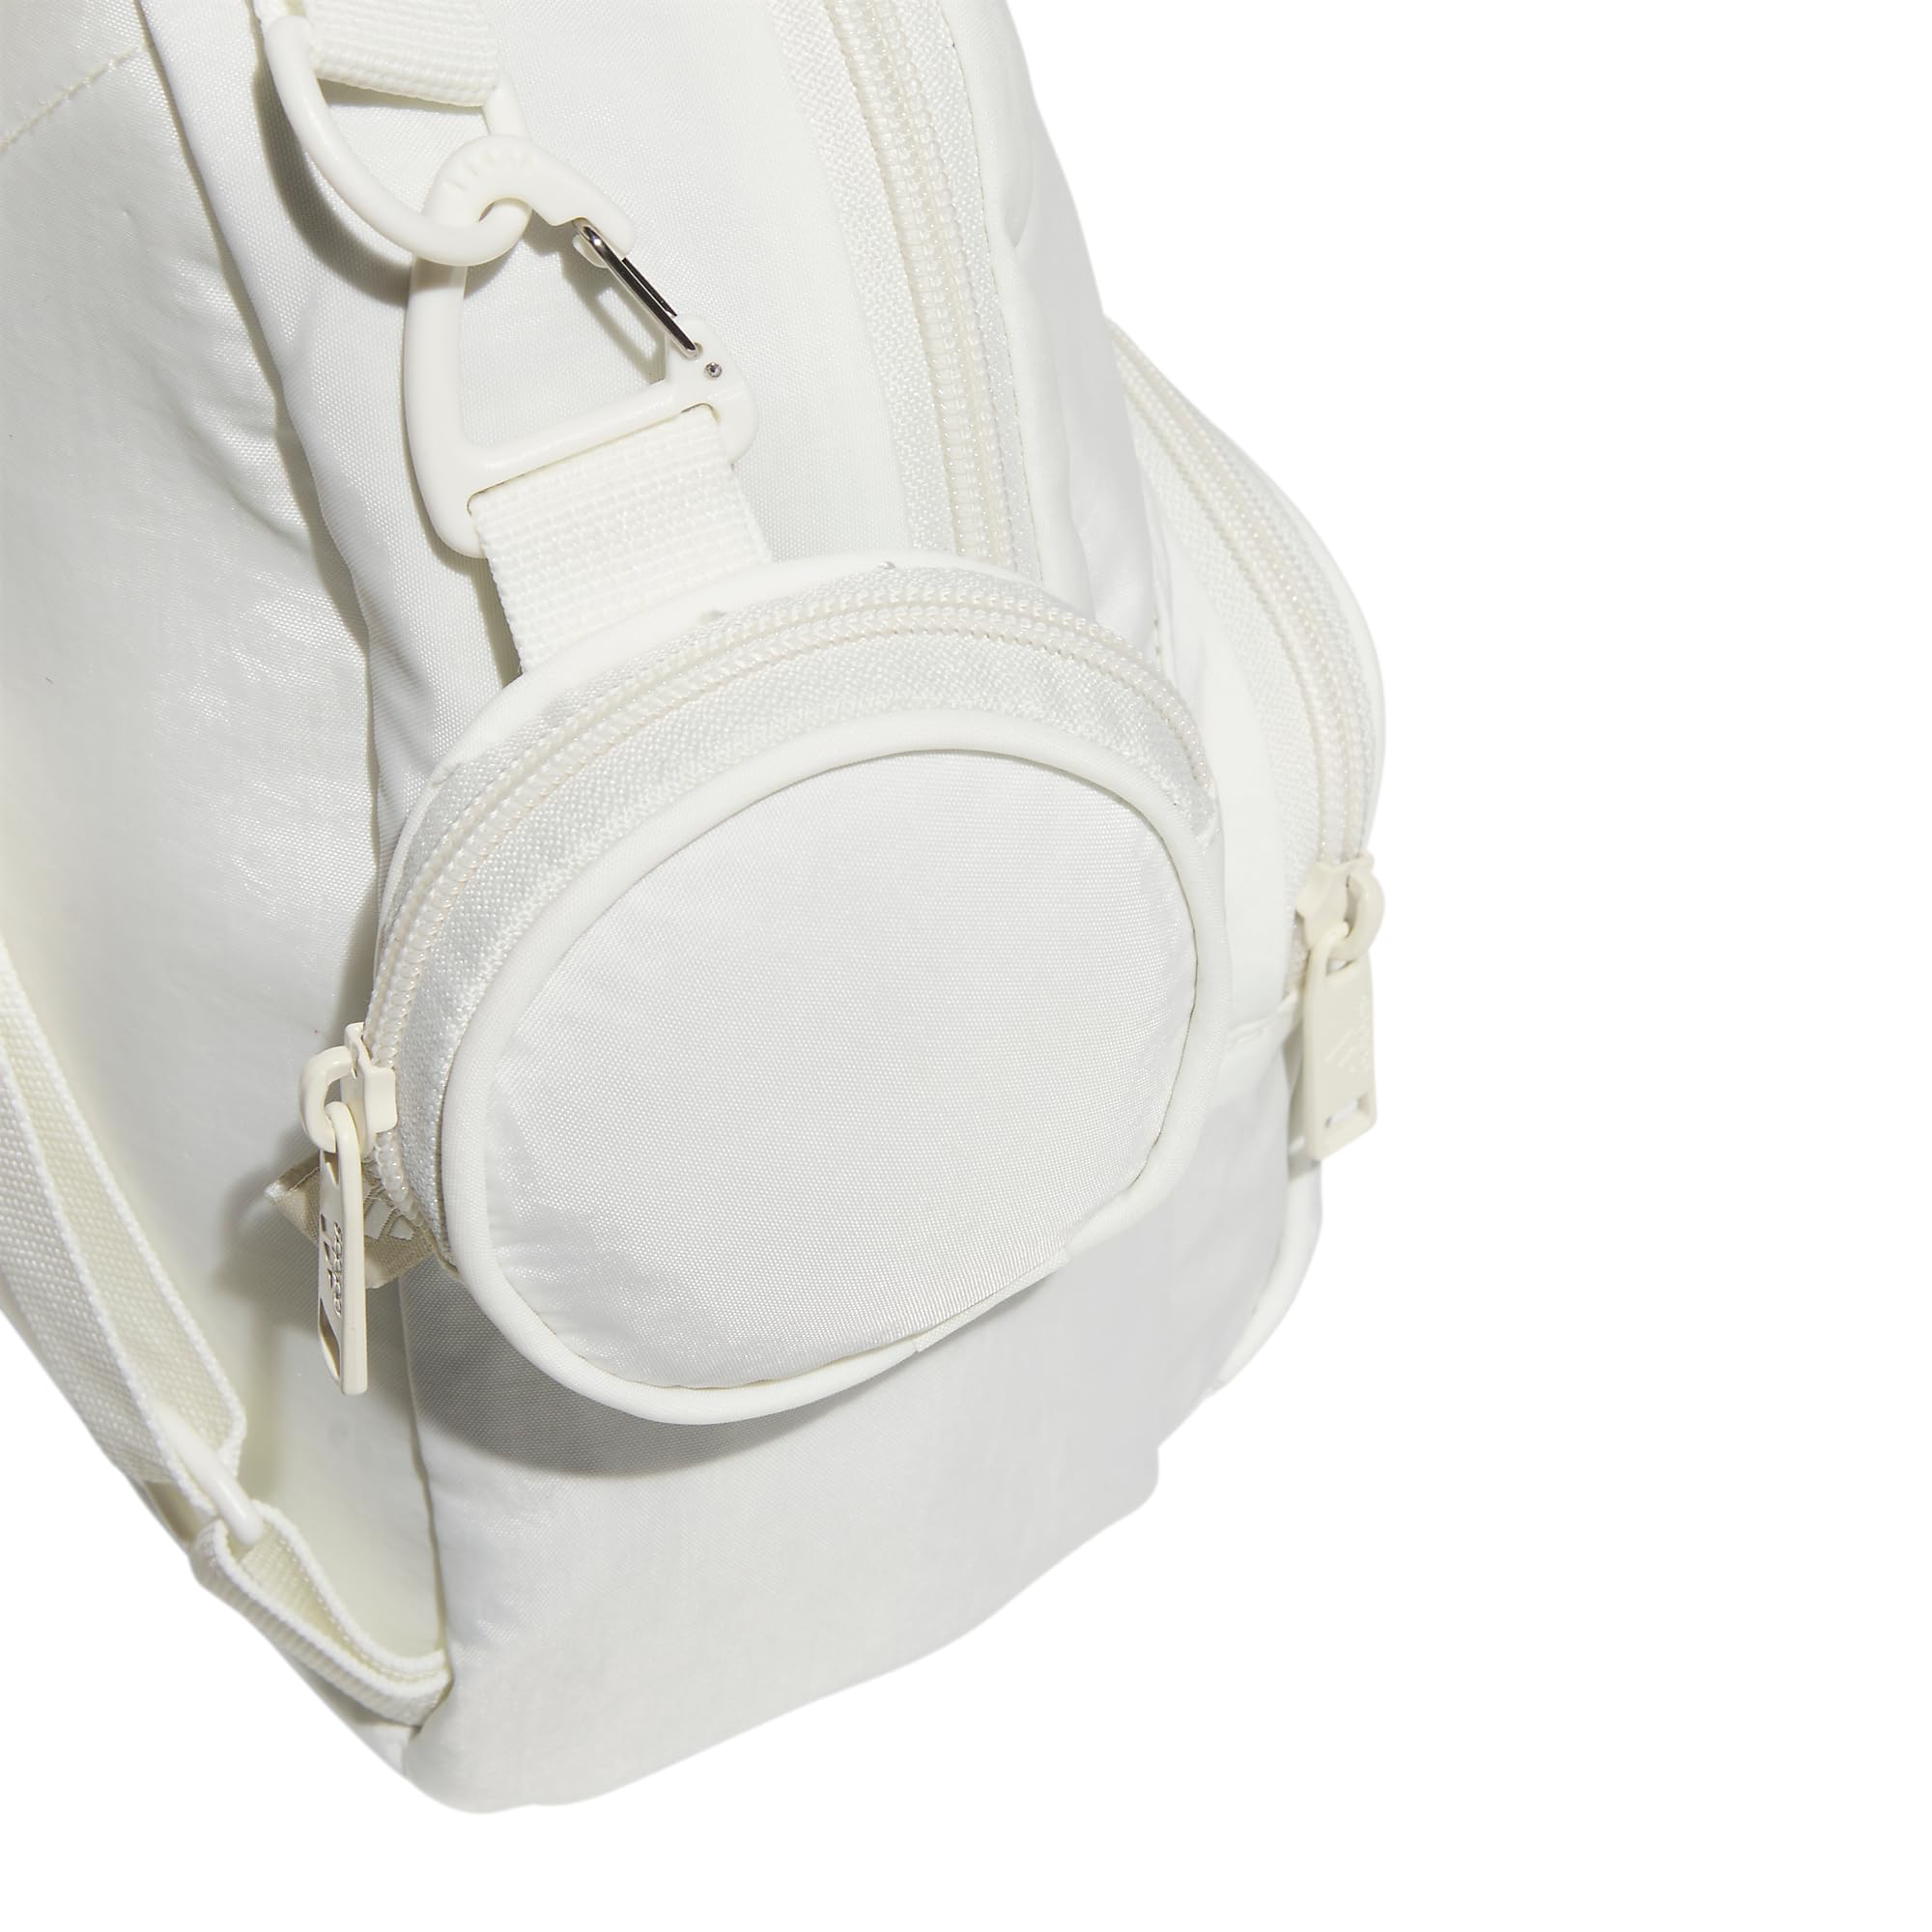 adidas Must Have Mini Backpack, Small Festivals and Travel, Off White/Putty Grey, One Size